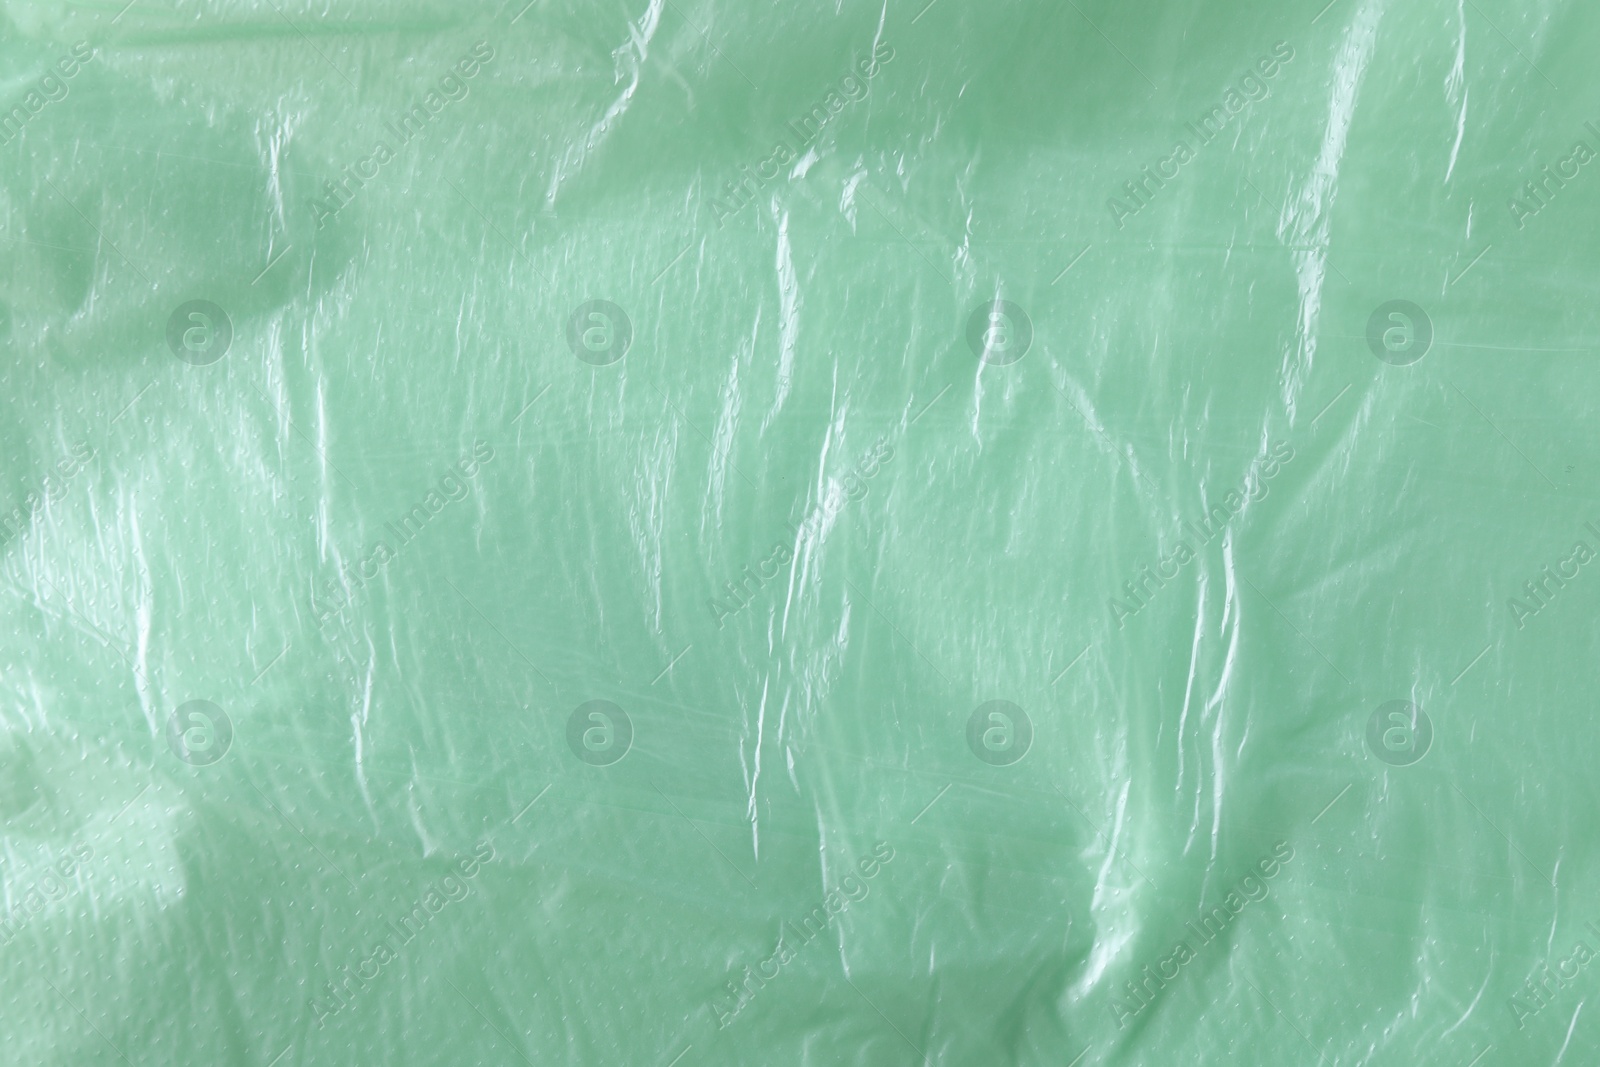 Photo of Texture of light green plastic bag as background, closeup